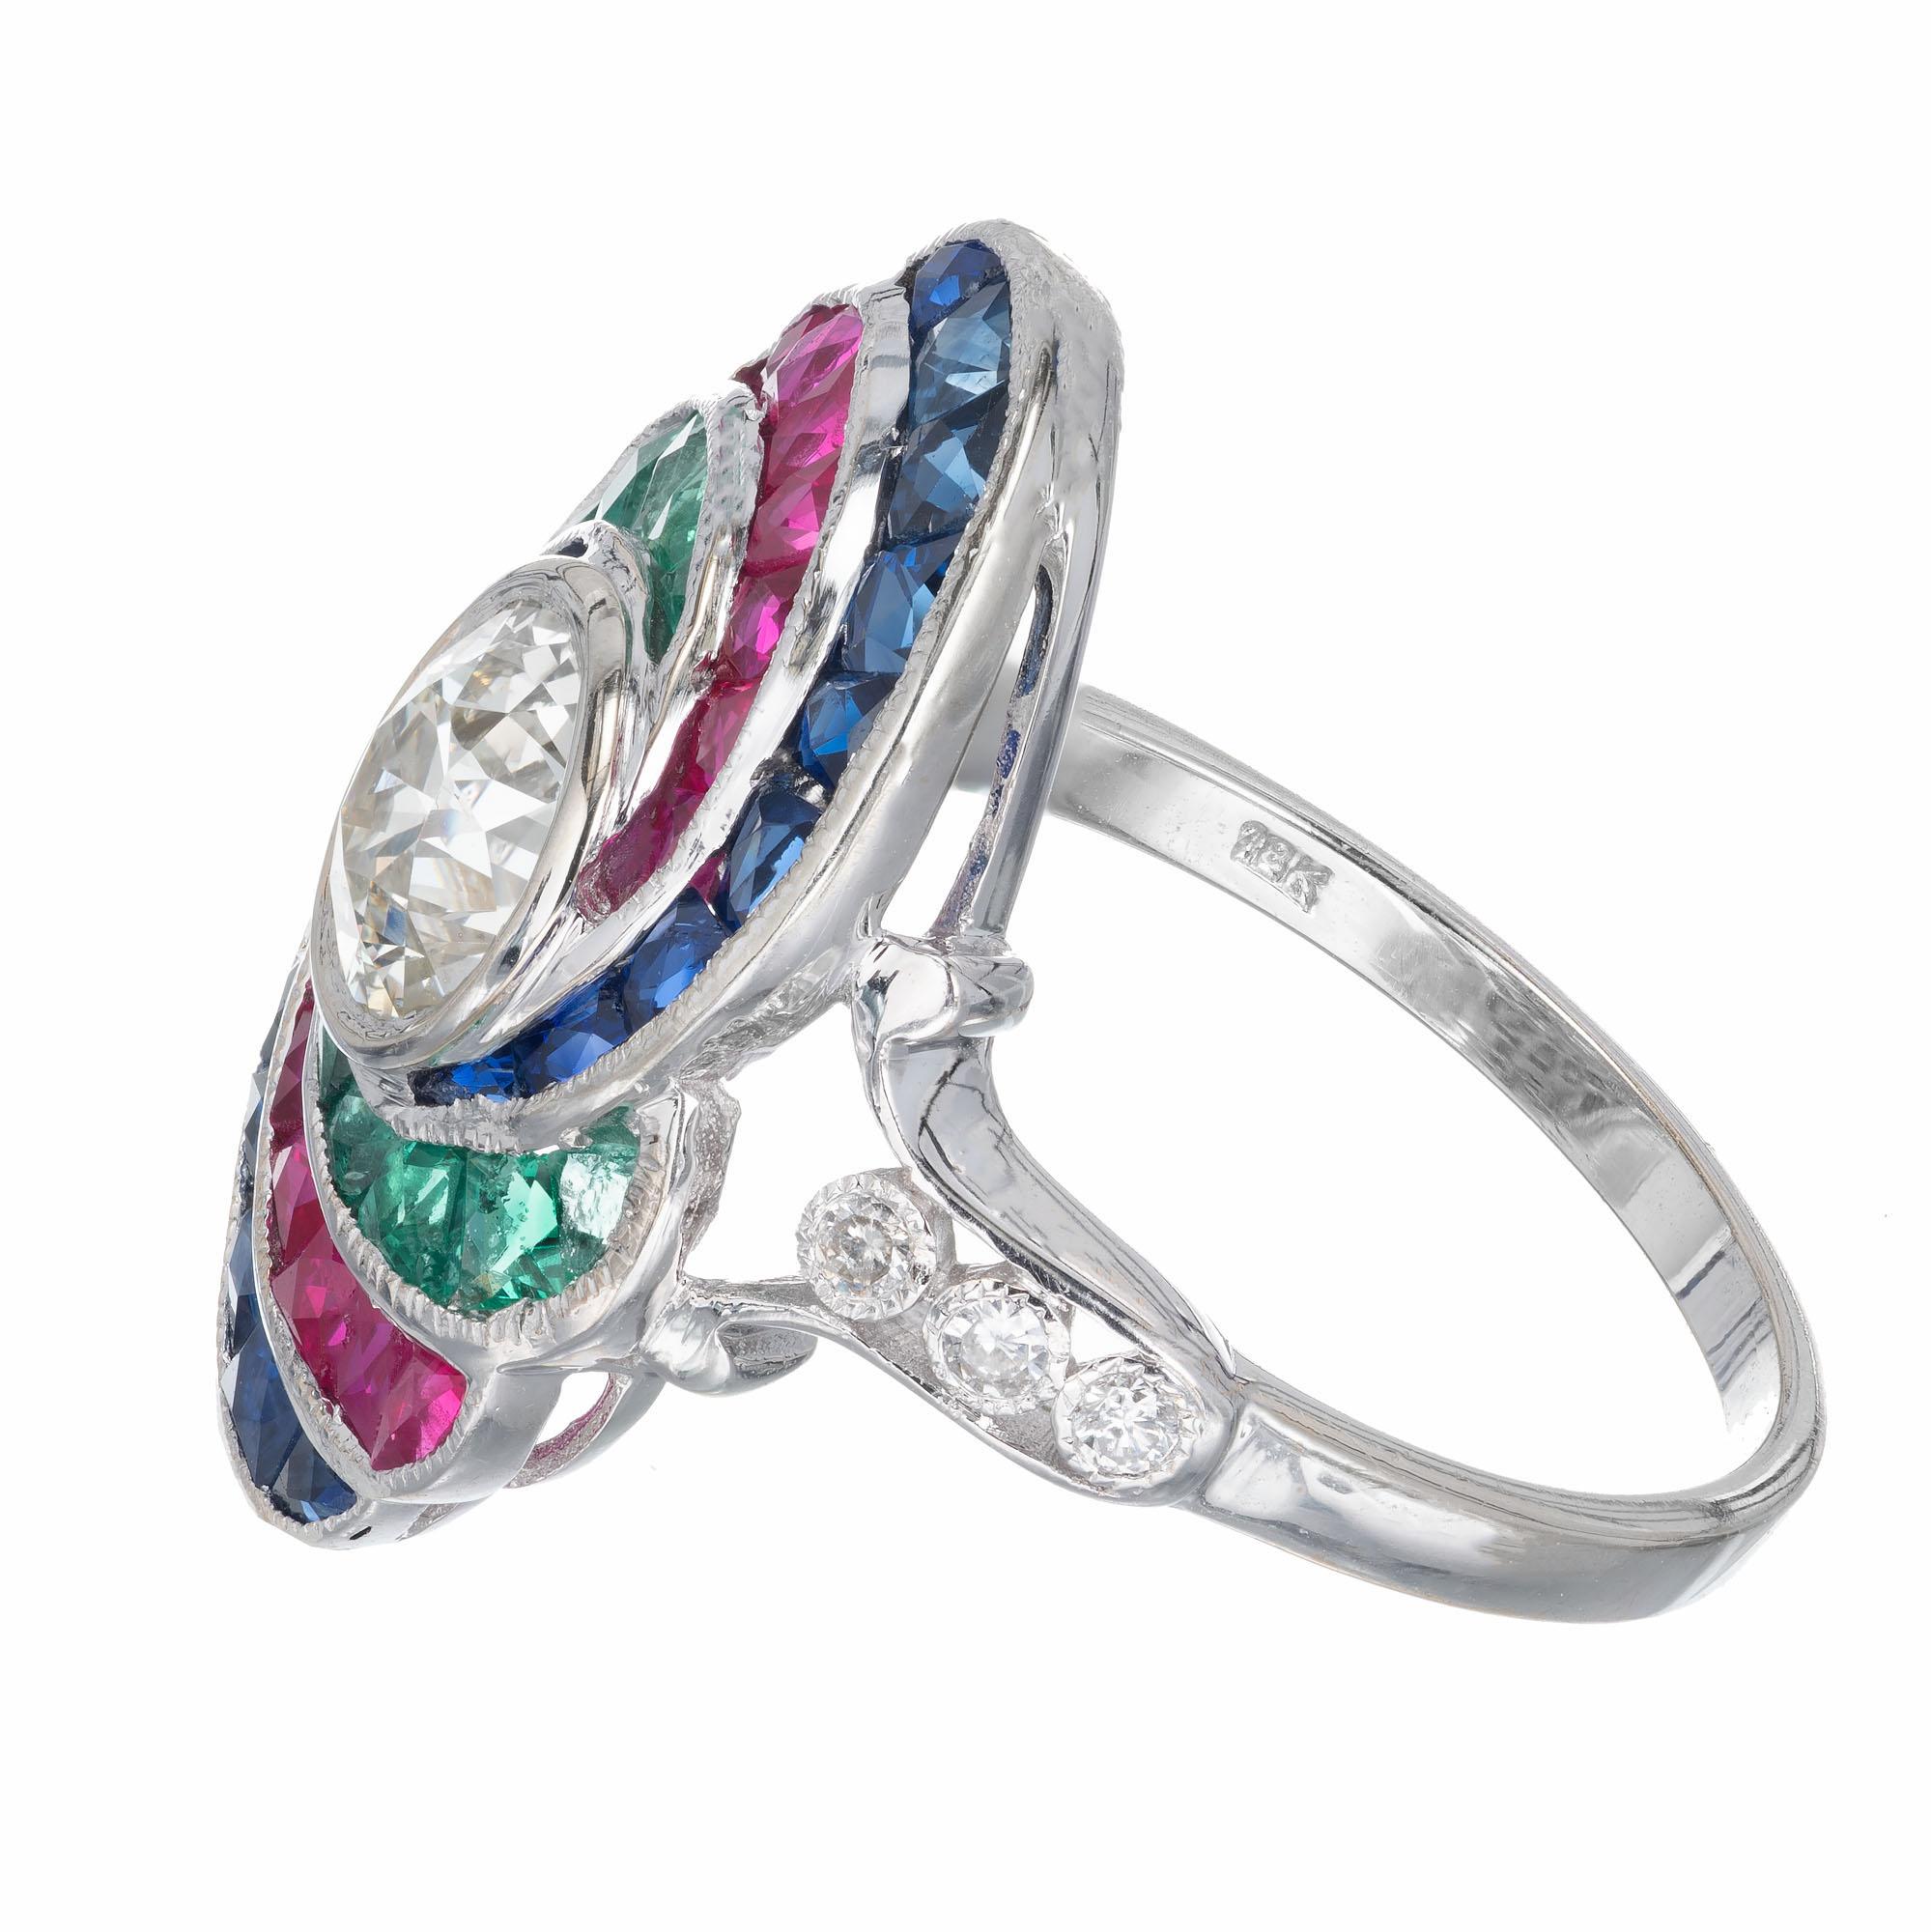 Diamond, sapphire, emerald, ruby swirl design cocktail ring. EGL certified 1.18ct Old European cut center diamond with a halo of French calibre cut emeralds, rubies and sapphires. 

1 old European brilliant cut diamond J-K SI, approx. 1.18ct EGL